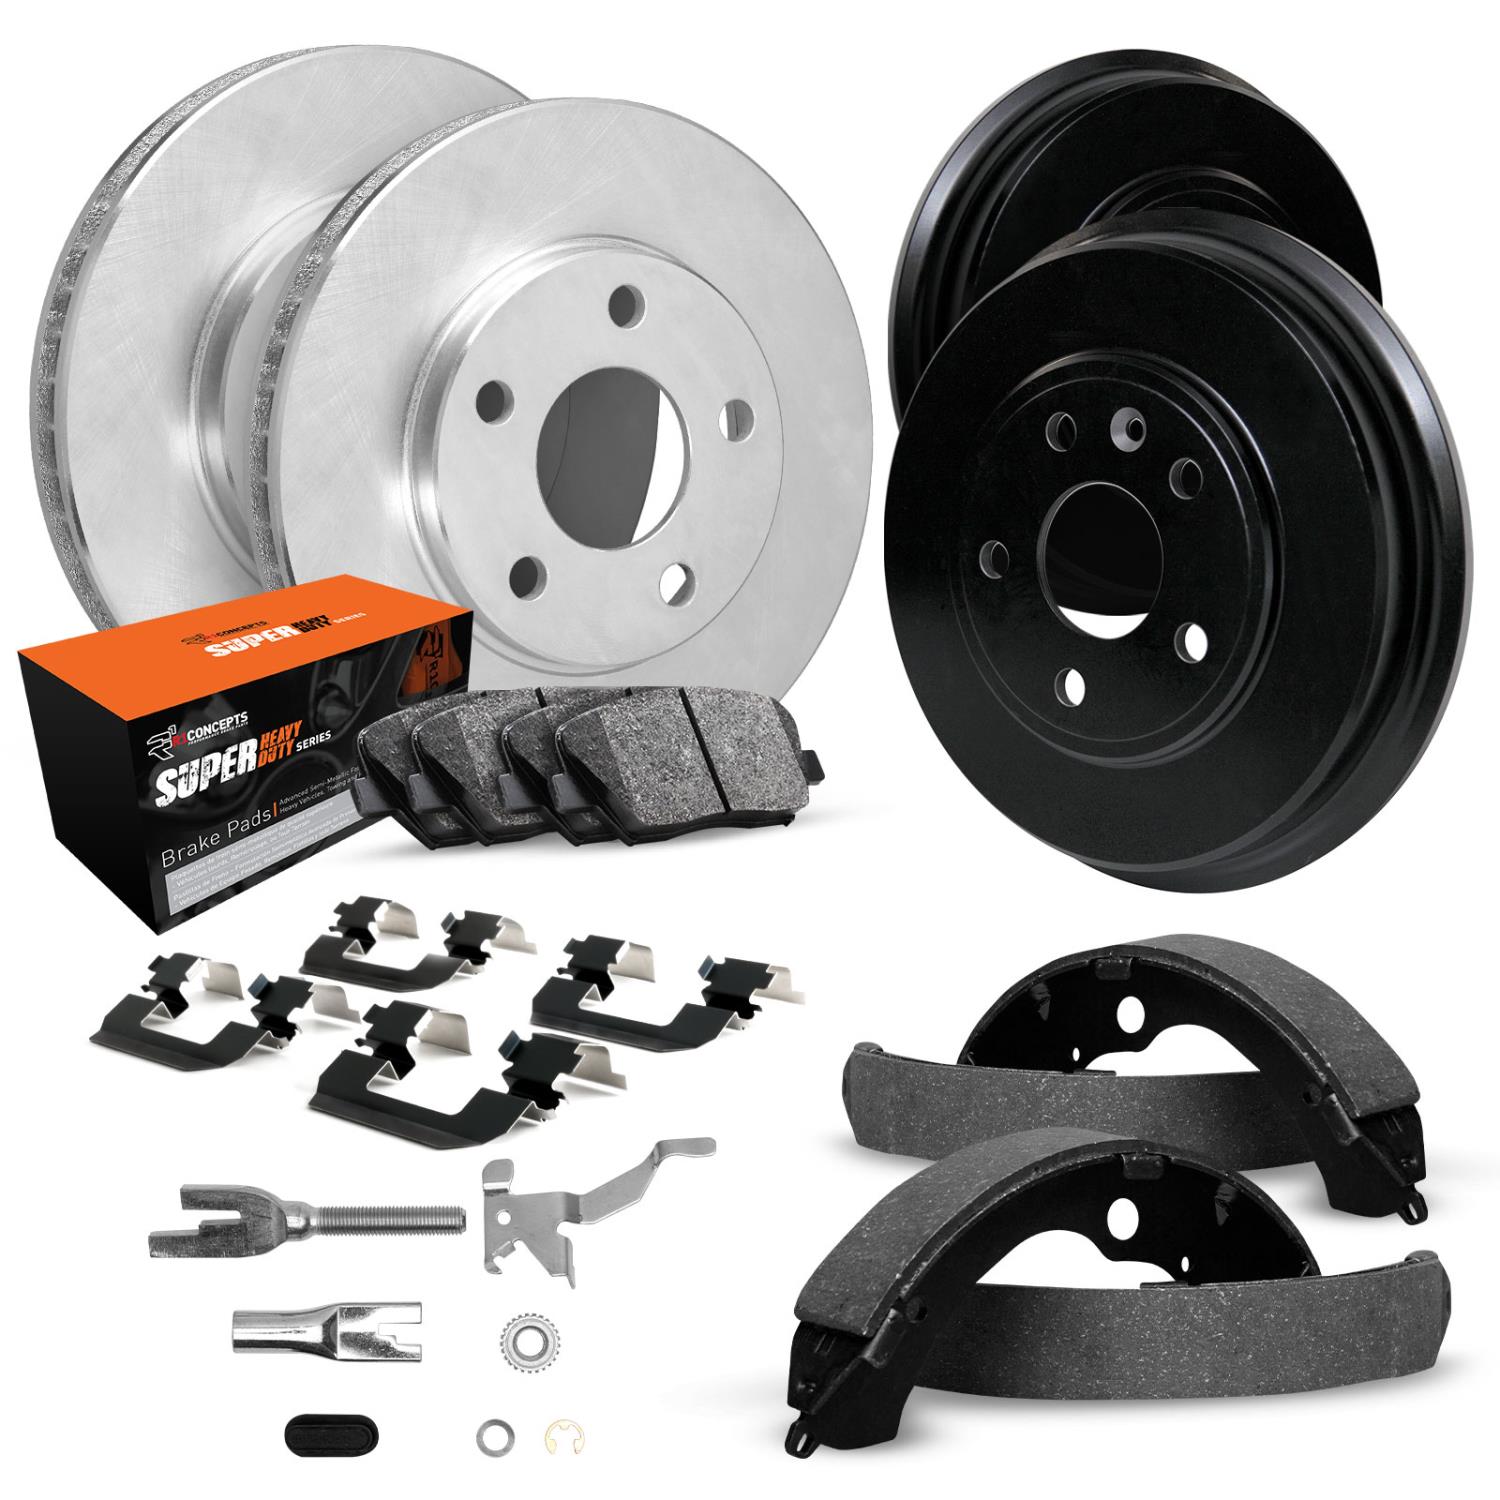 E-Line Blank Brake Rotor & Drum Set w/Super-Duty Pads, Shoes, Hardware, & Adjusters, 1974-1976 Ford/Lincoln/Mercury/Mazda